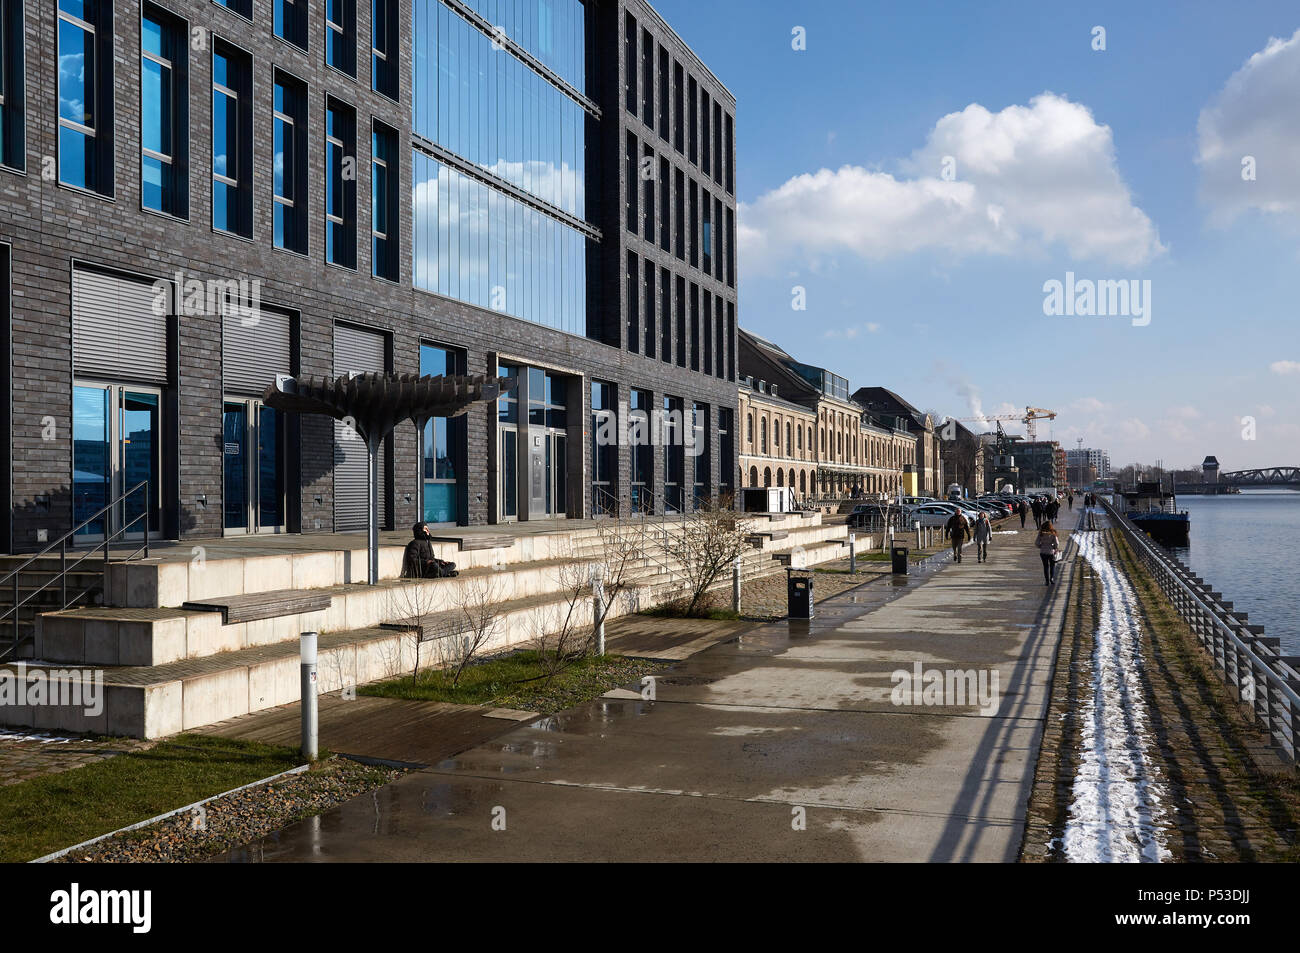 Berlin, Germany - The administrative building of VIMN Germany GmbH and other commercial buildings on the banks of the river Spree in Berlin-Friedrichshain. Stock Photo